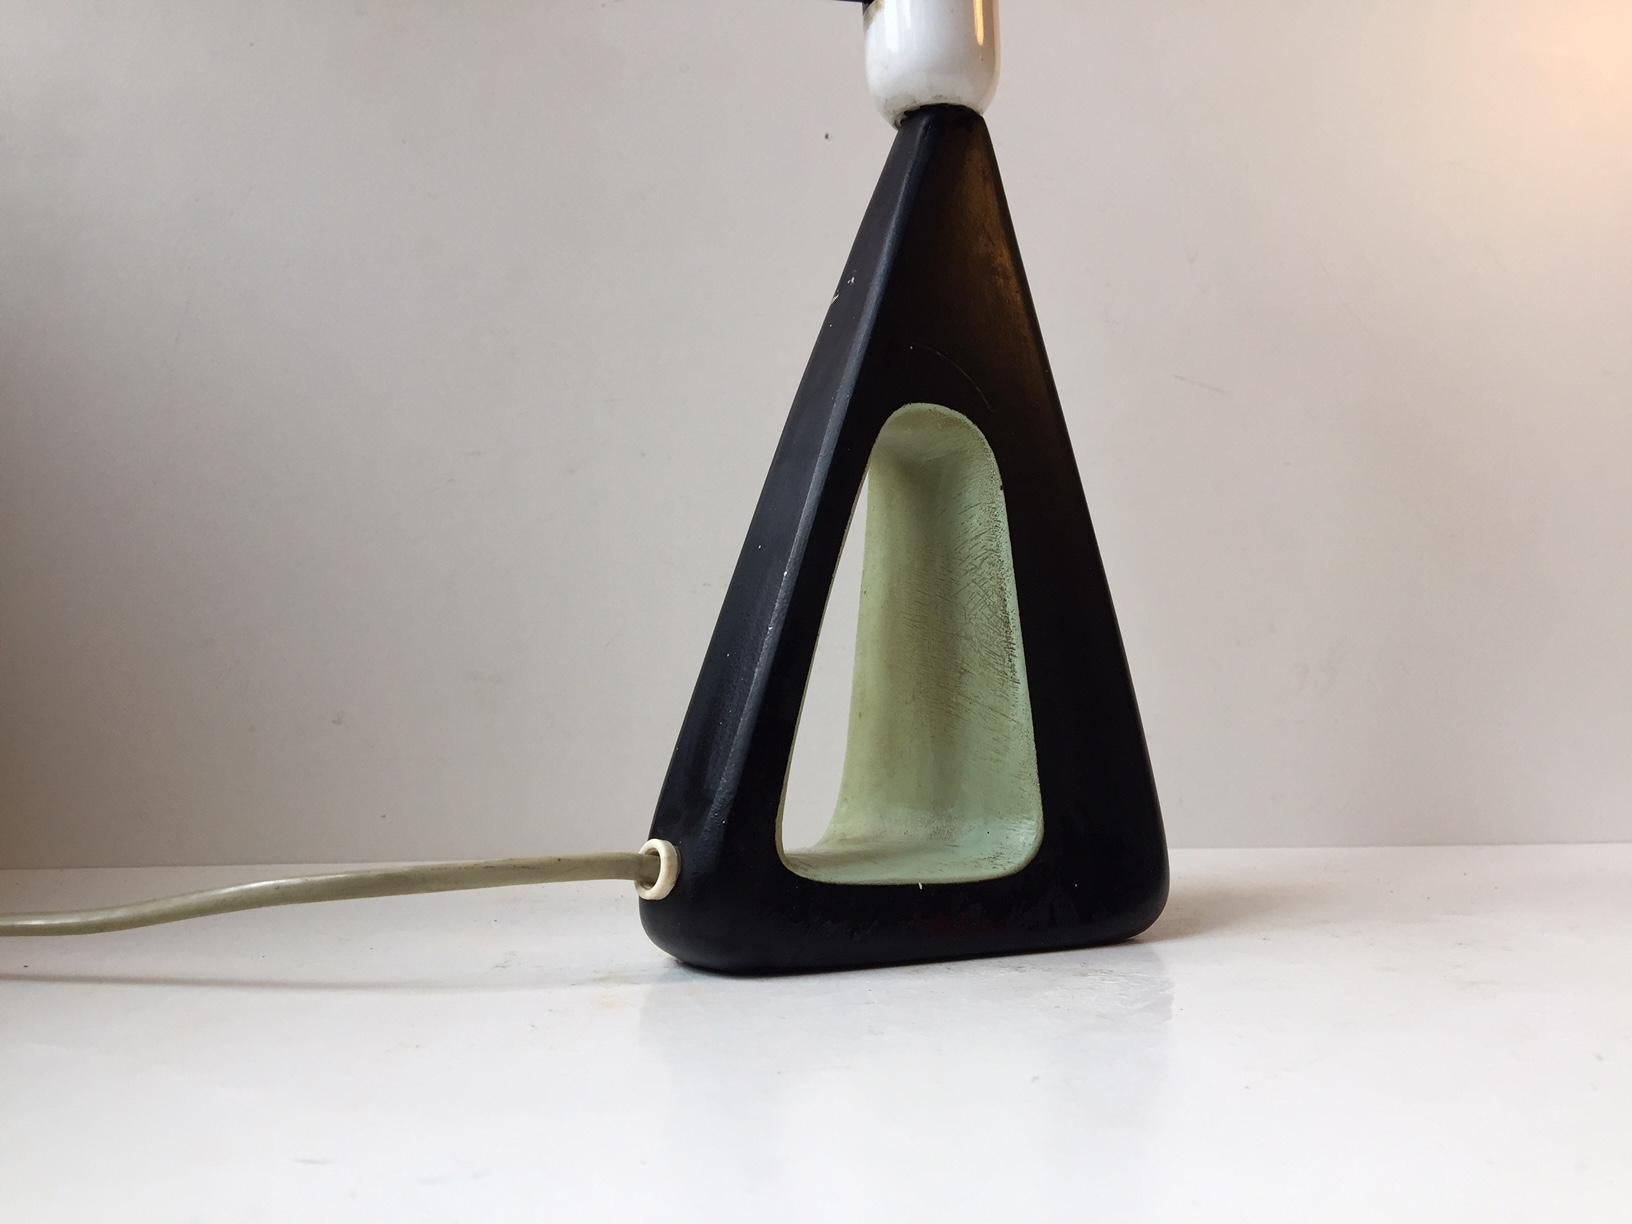 Powder-Coated Black and Green Modernist Table Lamp from Brown Evans & Co., 1950s